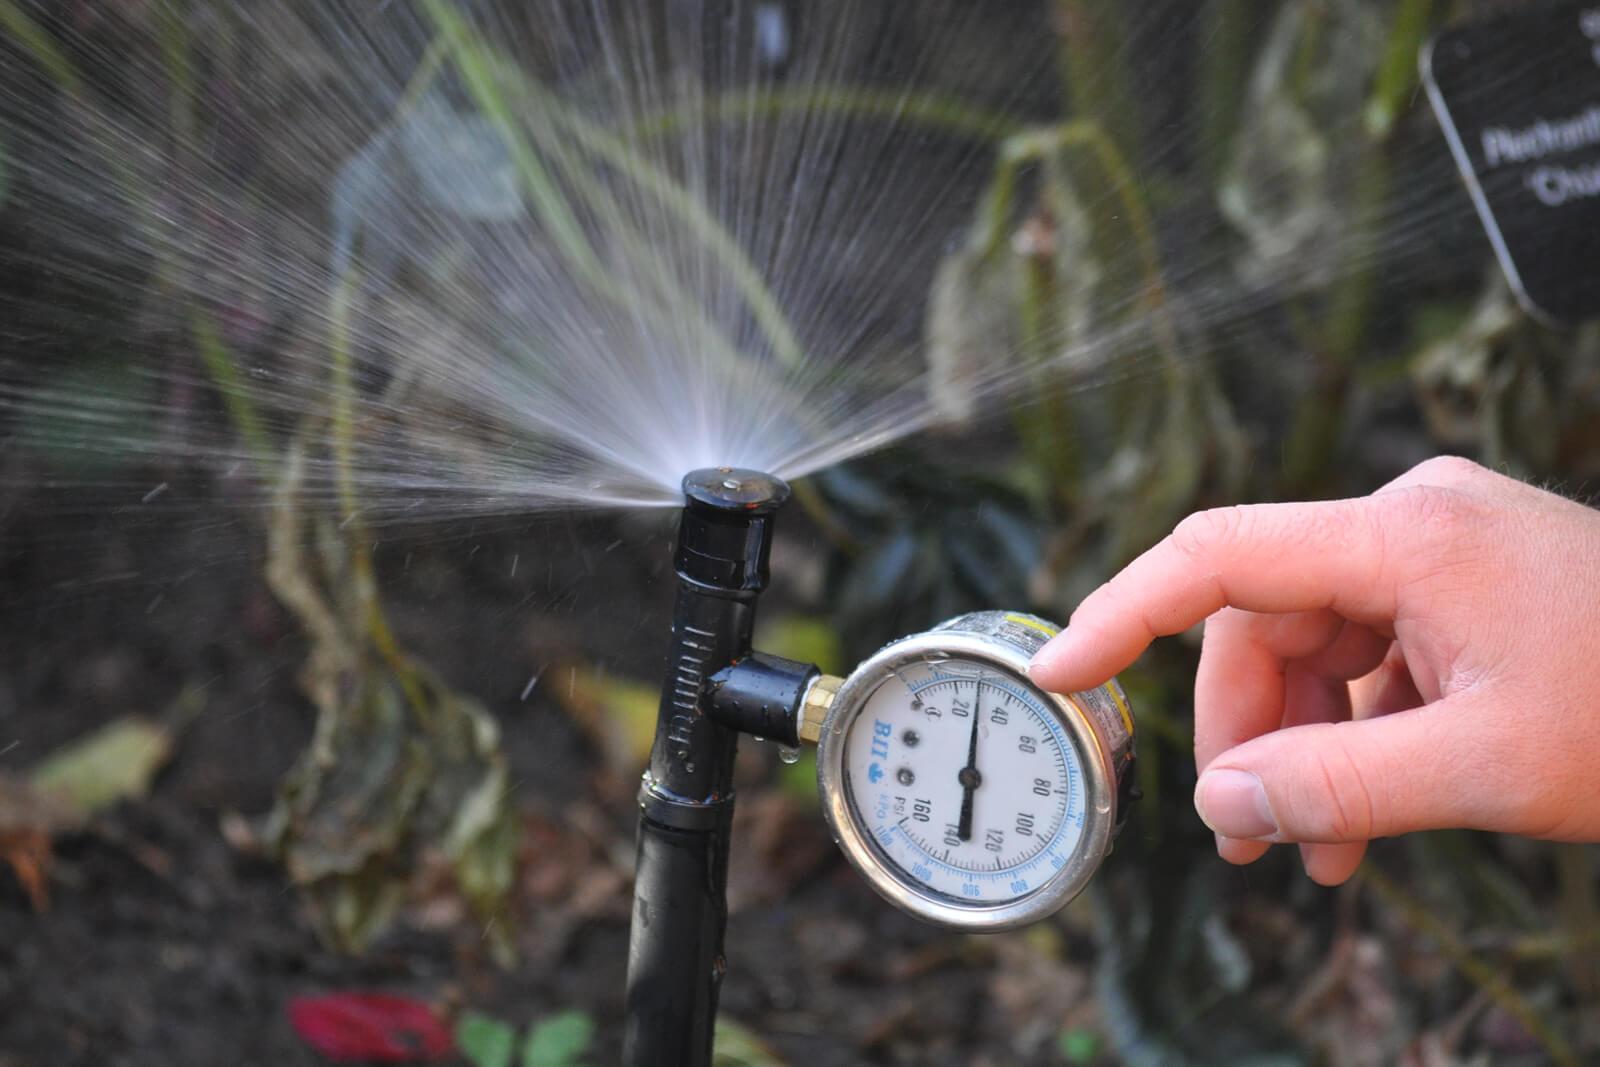 On average, an irrigation system assessment by a WSIP certified contractor can result in over a 50 per cent water savings opportunity.